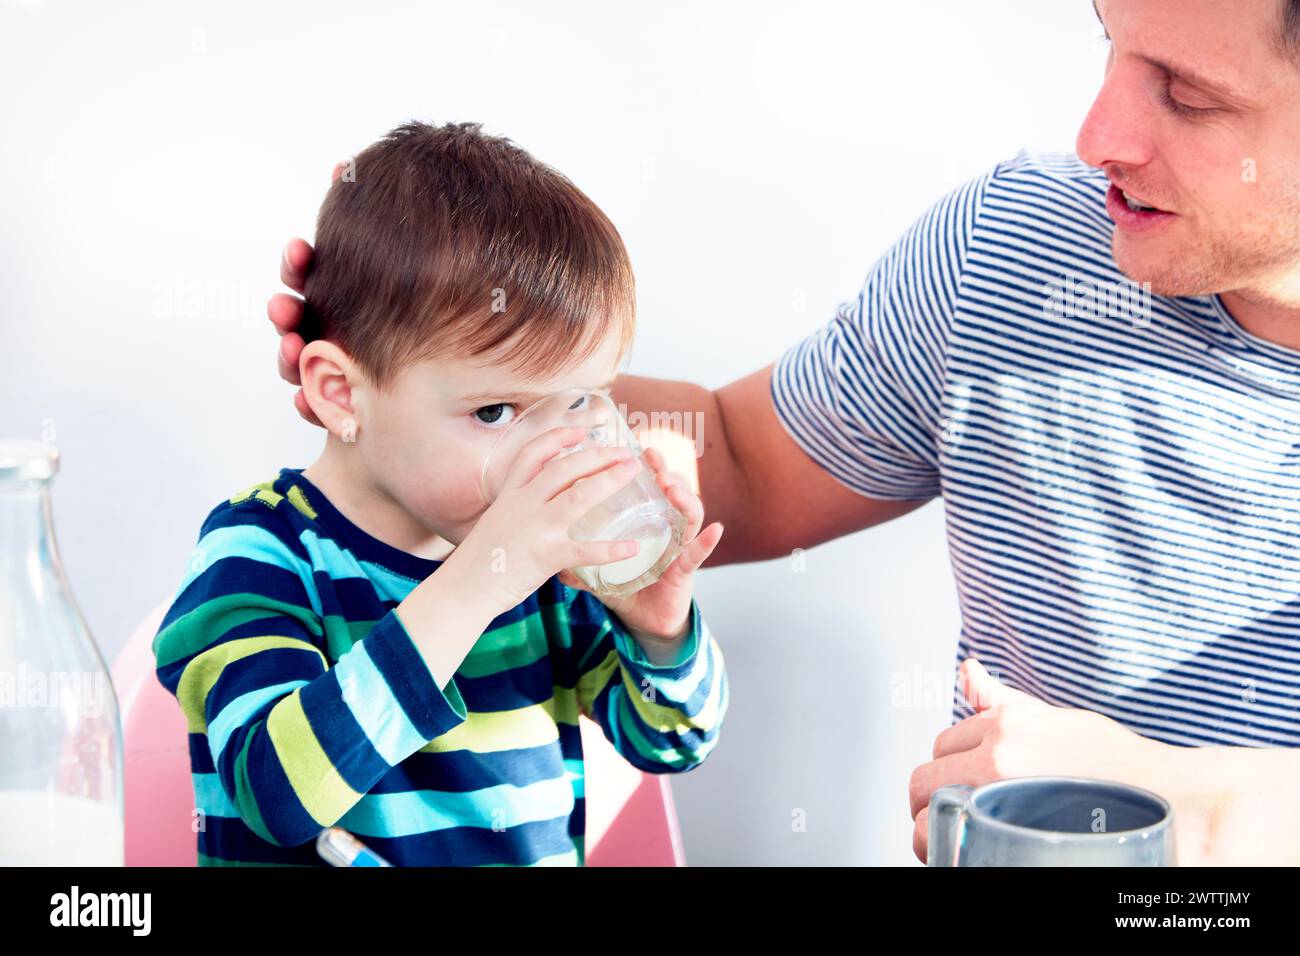 Boy drinking milk with an adult by his side. Stock Photo